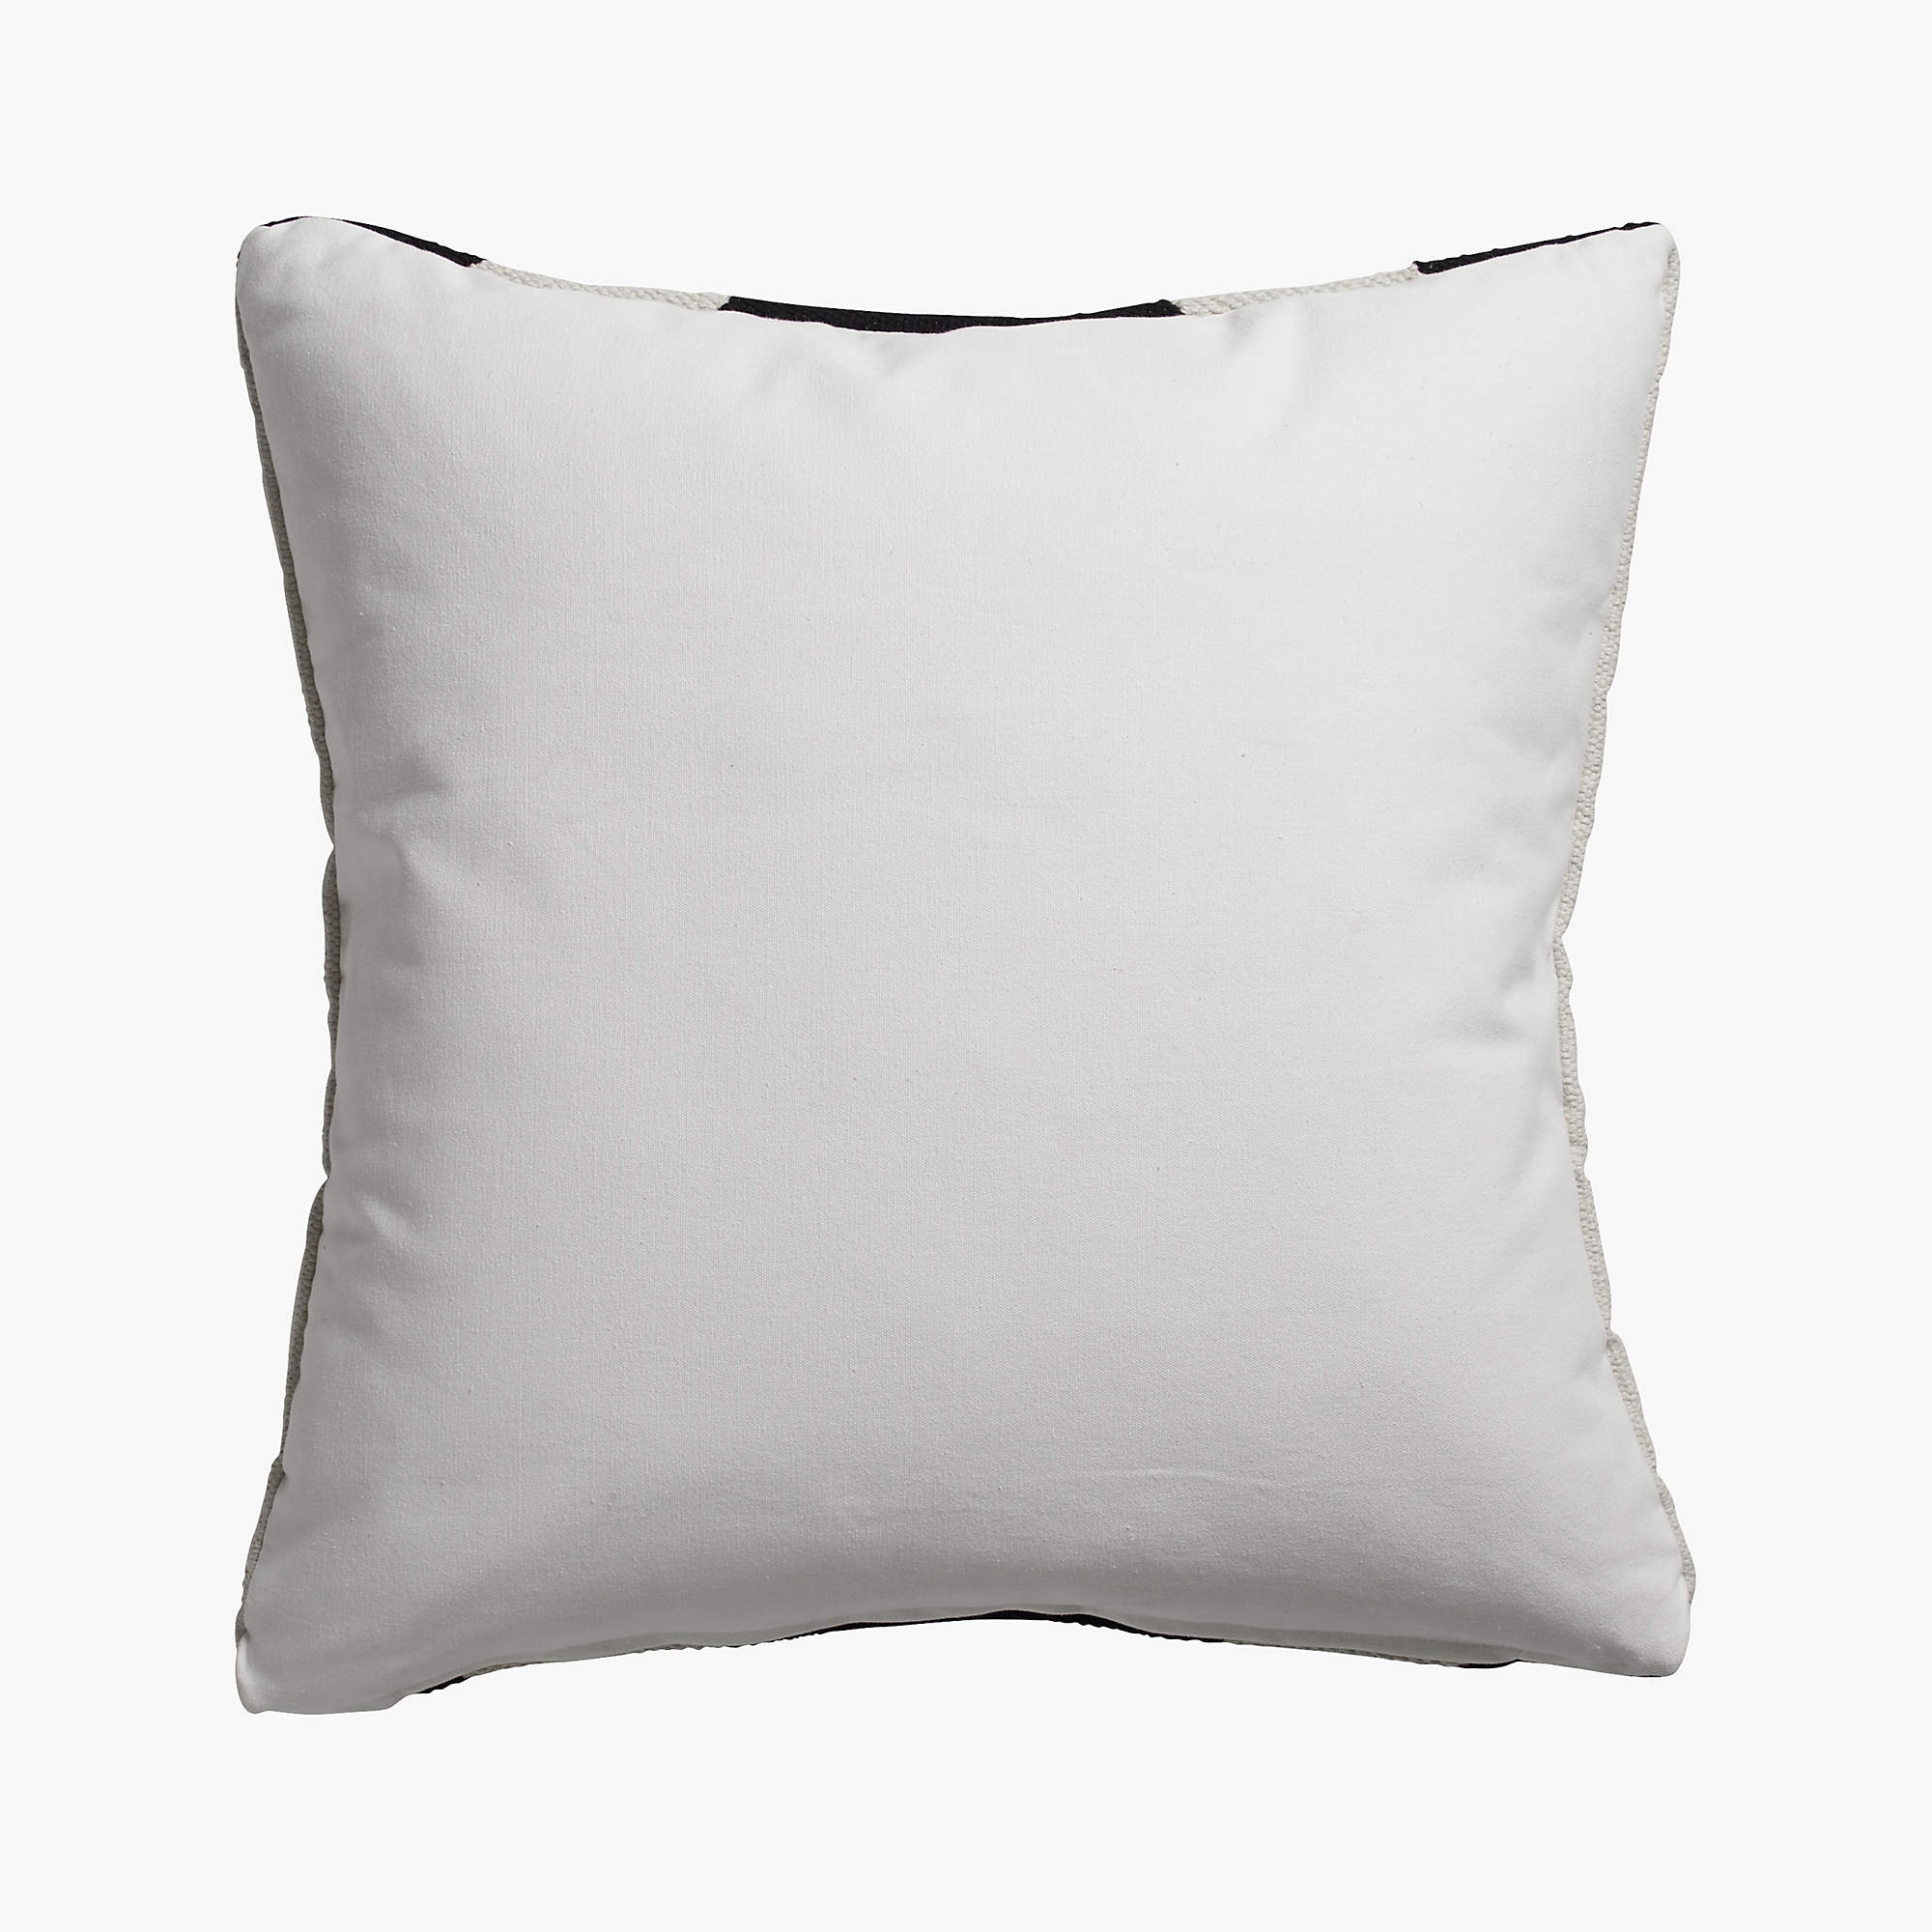 Xbase Pillow Feather Down Insert, 23" x 23" - Image 2